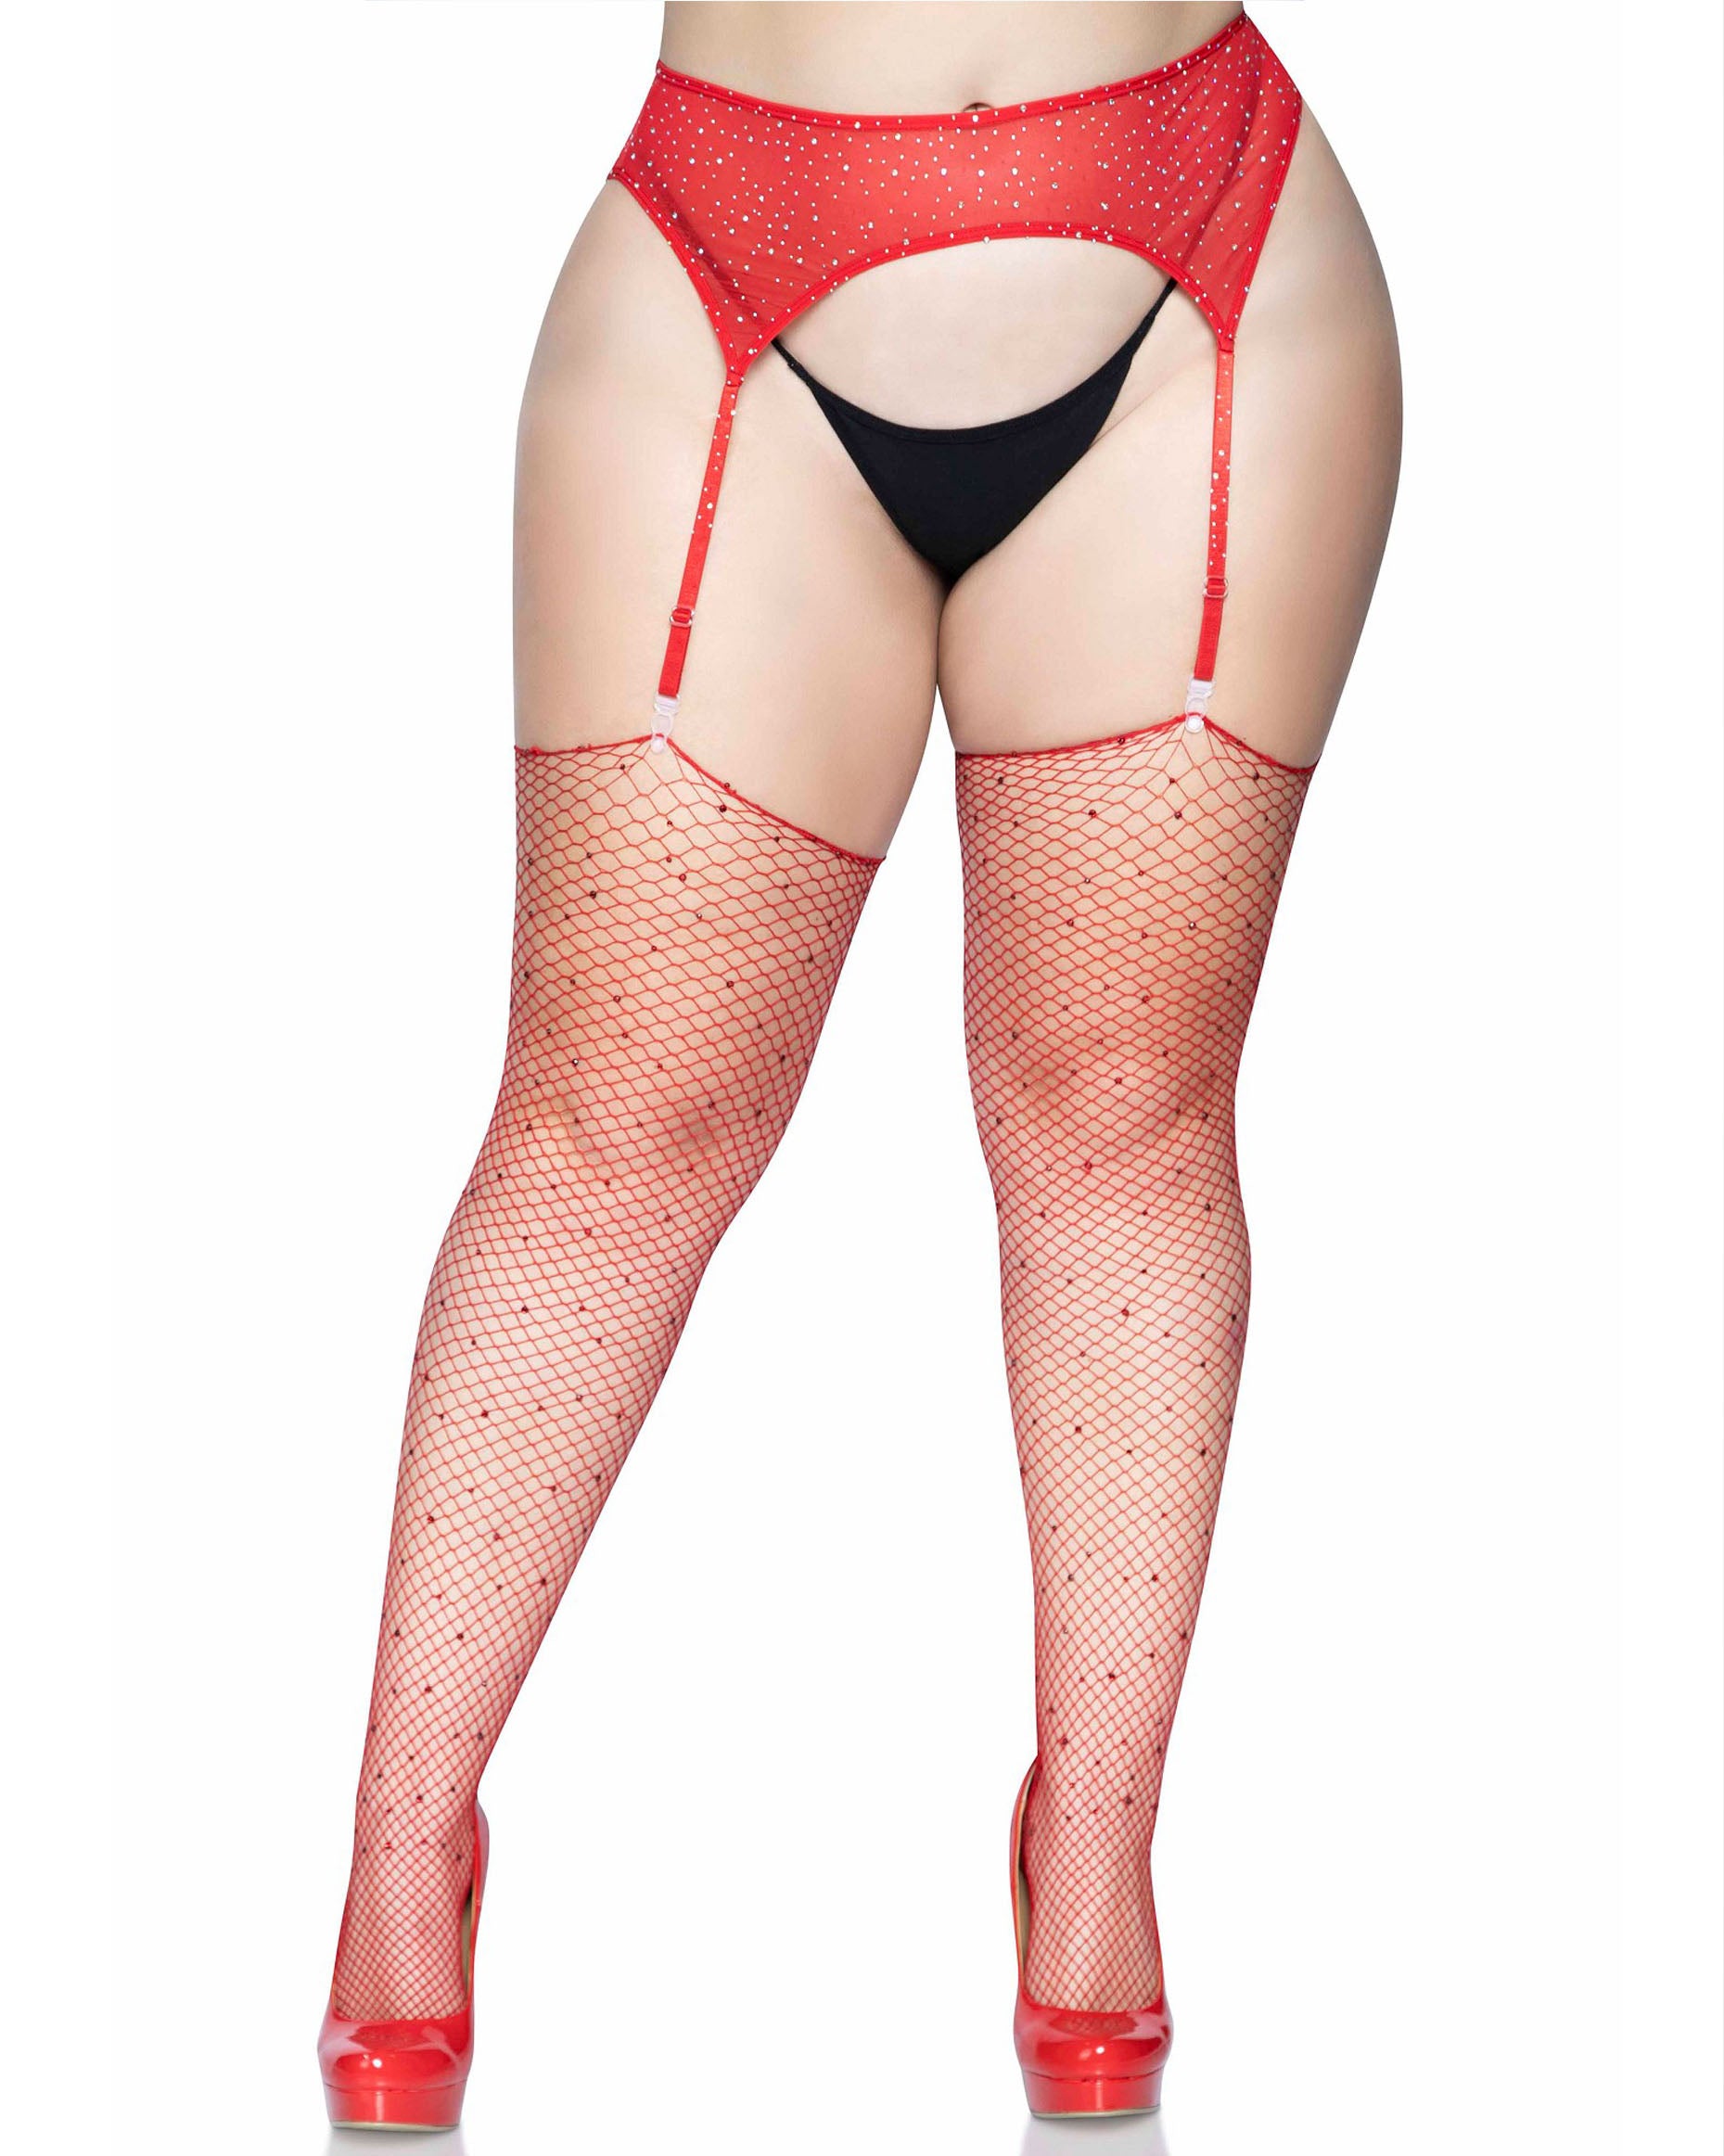 Leg Avenue 9124X Rhinestone Fishnet Stockings - Red plus size curvy diamond fishnet stockings for suspender belt with diamante' jewel crystals dotted all over and an unfinished top